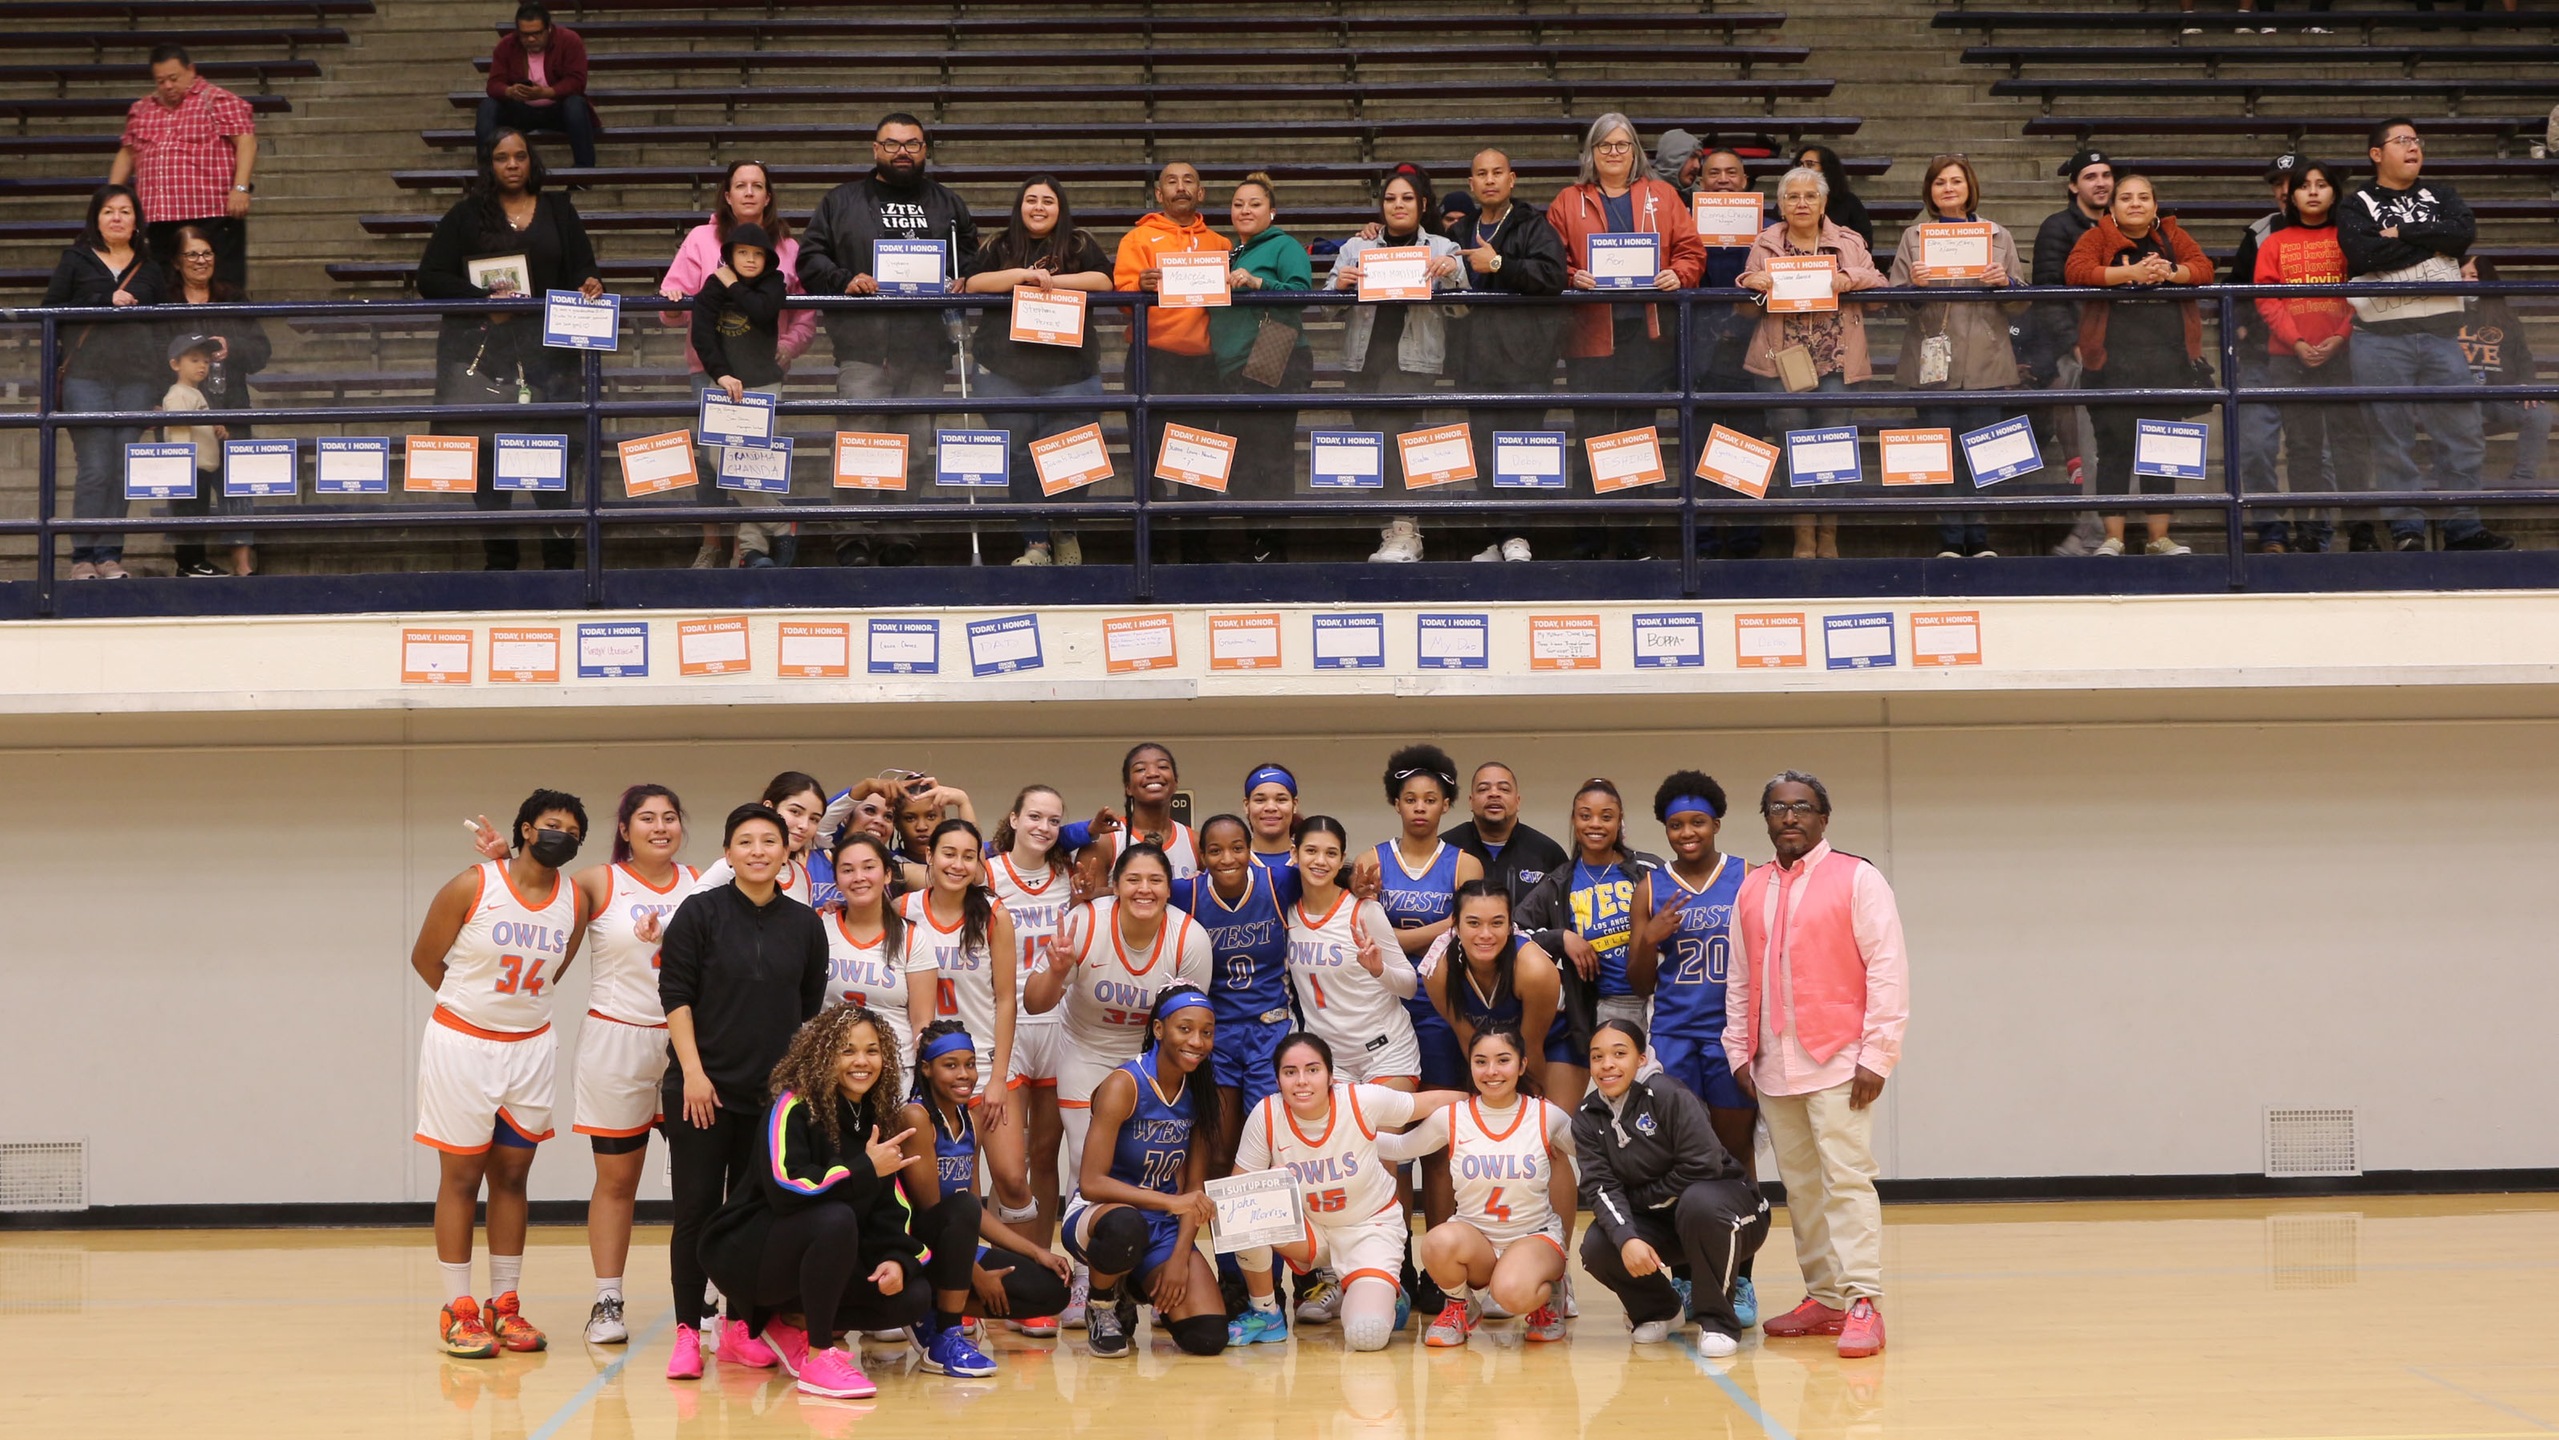 Citrus and West LA battled in a Coaches vs. Cancer game to defeat a common opponent: cancer.